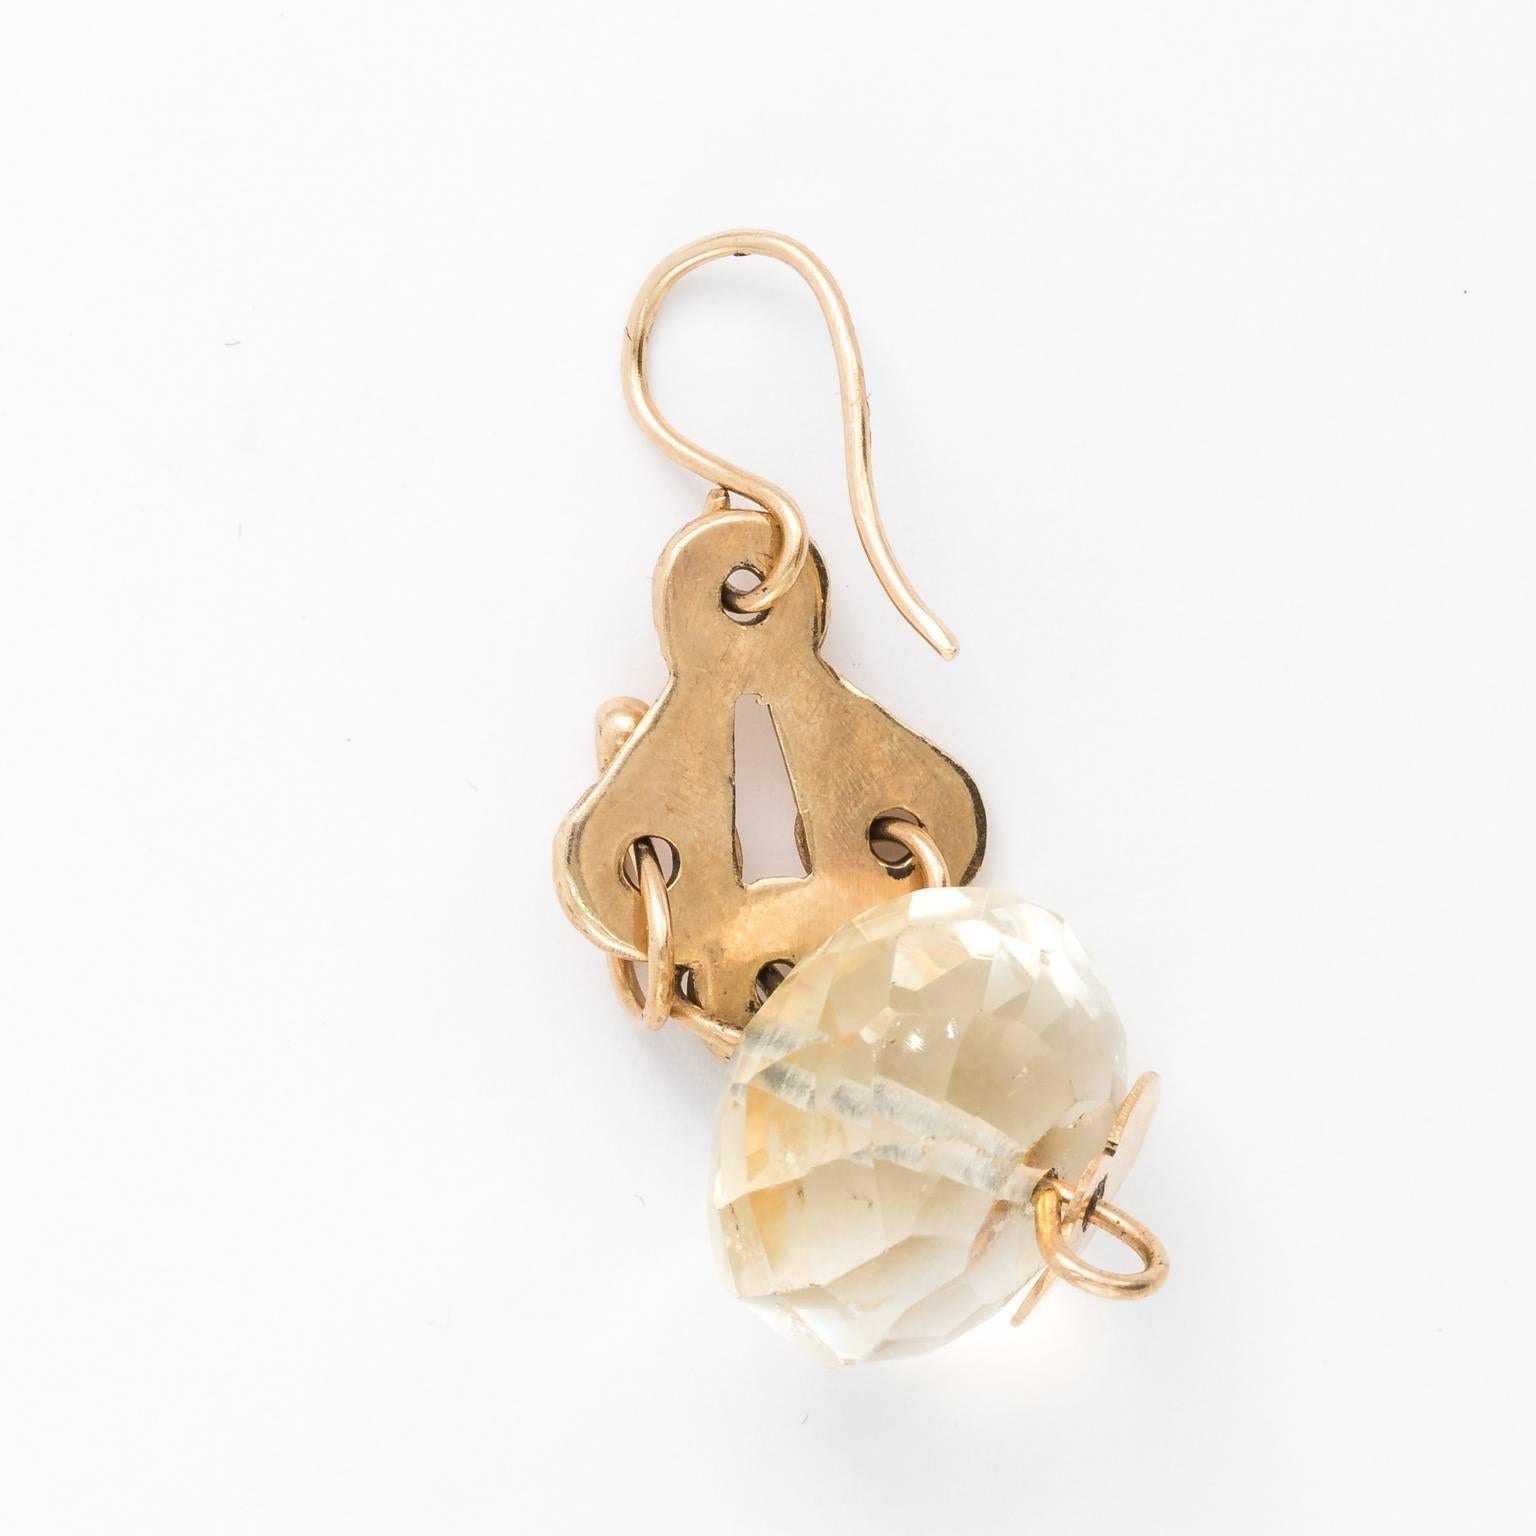 Circa 1960 artisan made earrings in 18 karat gold with faceted citrine, by a jeweler in Cap Cod. The earrings feature intersecting circles with gold loops and leaf shaped motifs.
